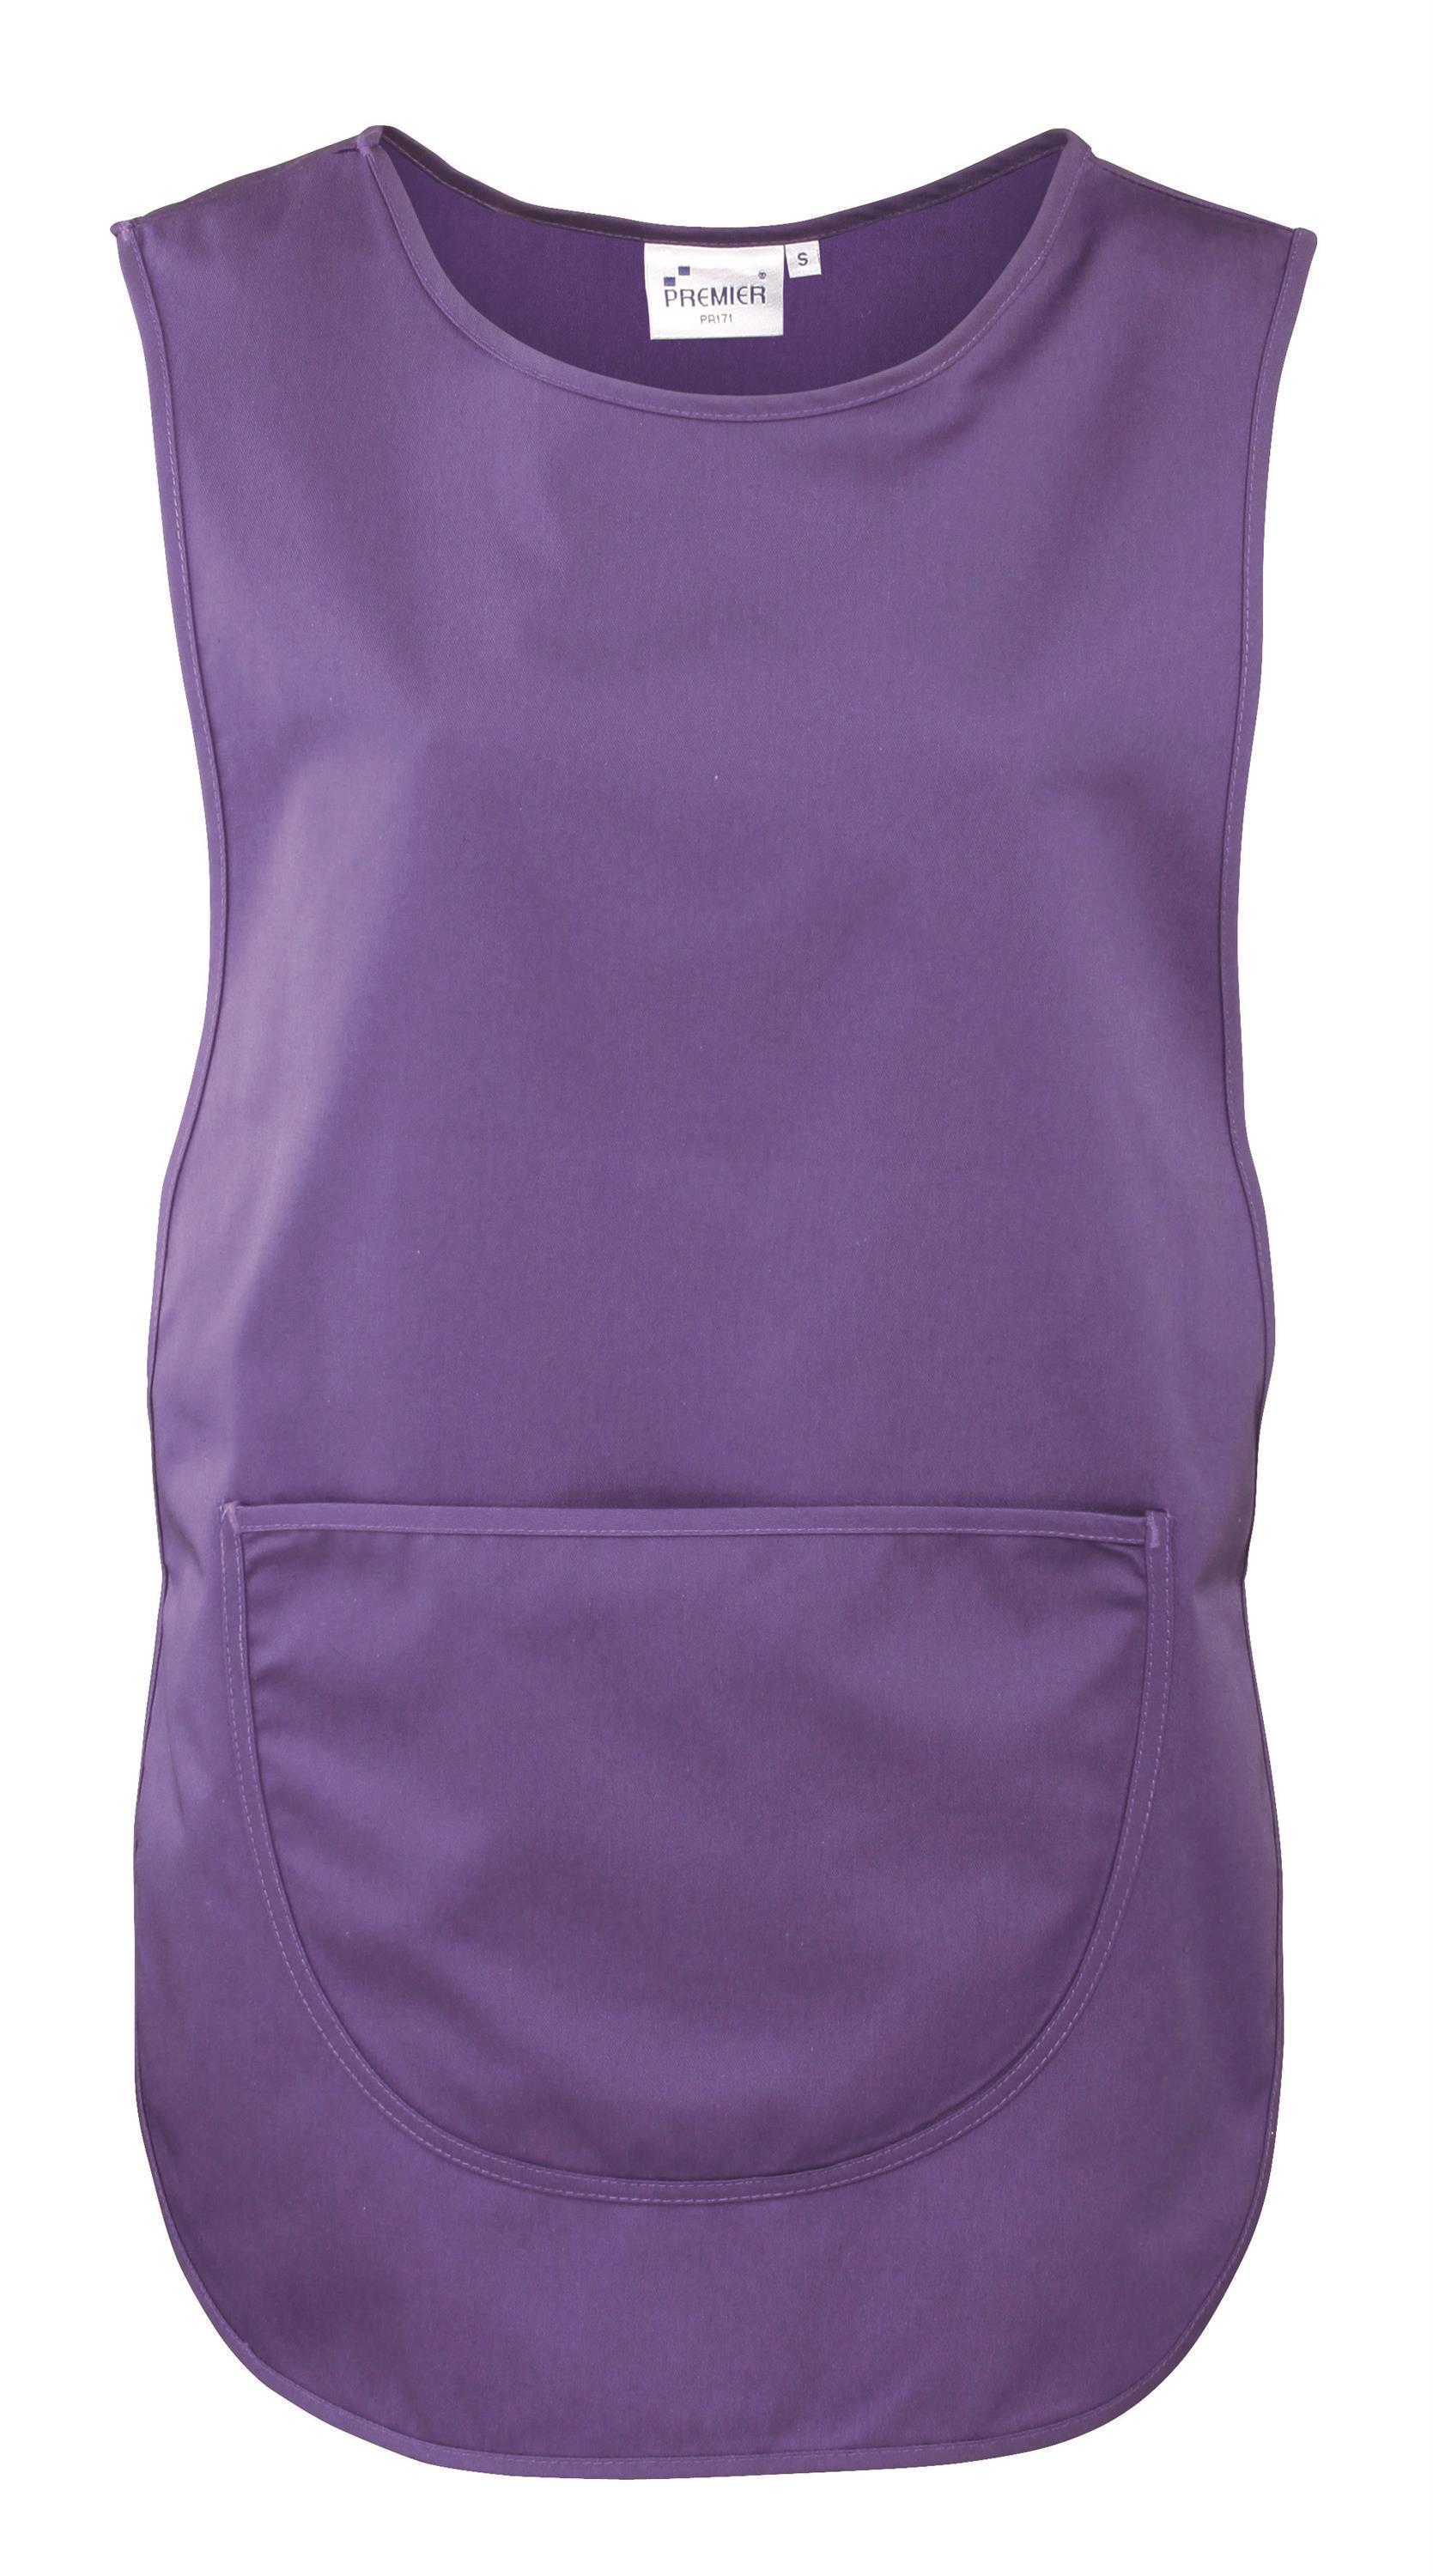 Throw-over apron short with pocket 195 g/m² Premier® Purple (approx. Pantone 269) S